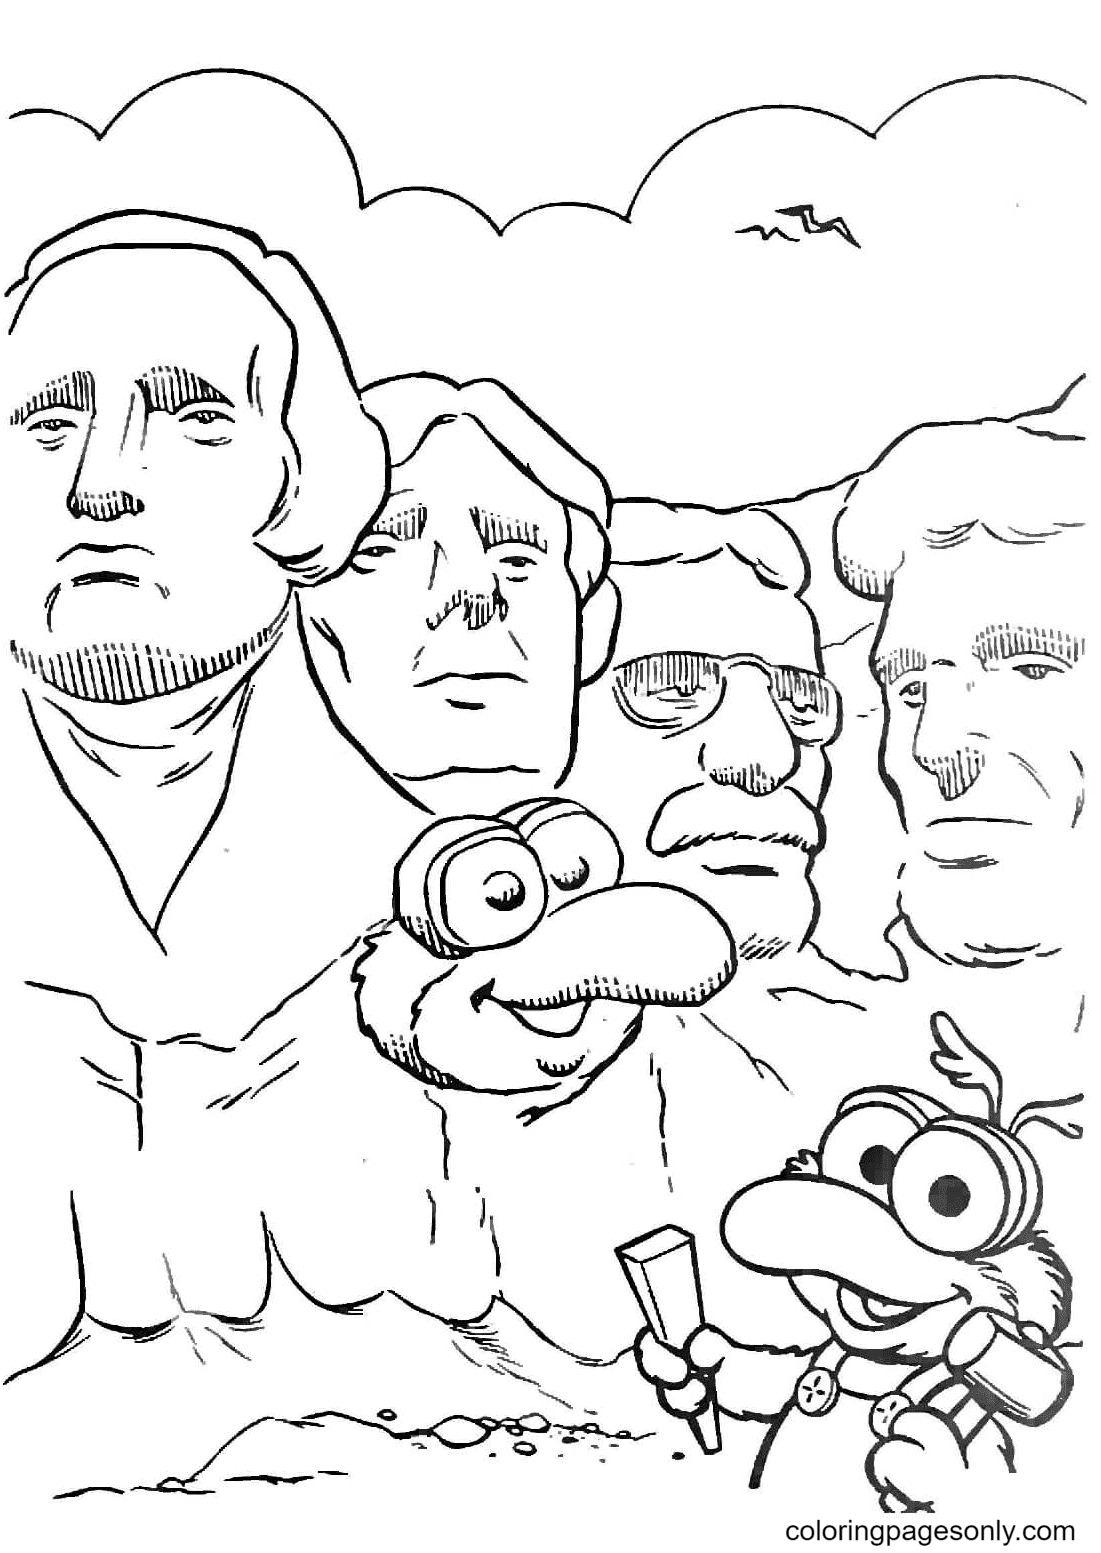 Baby Gonzo and Mount Rushmore National Memorial Coloring Pages